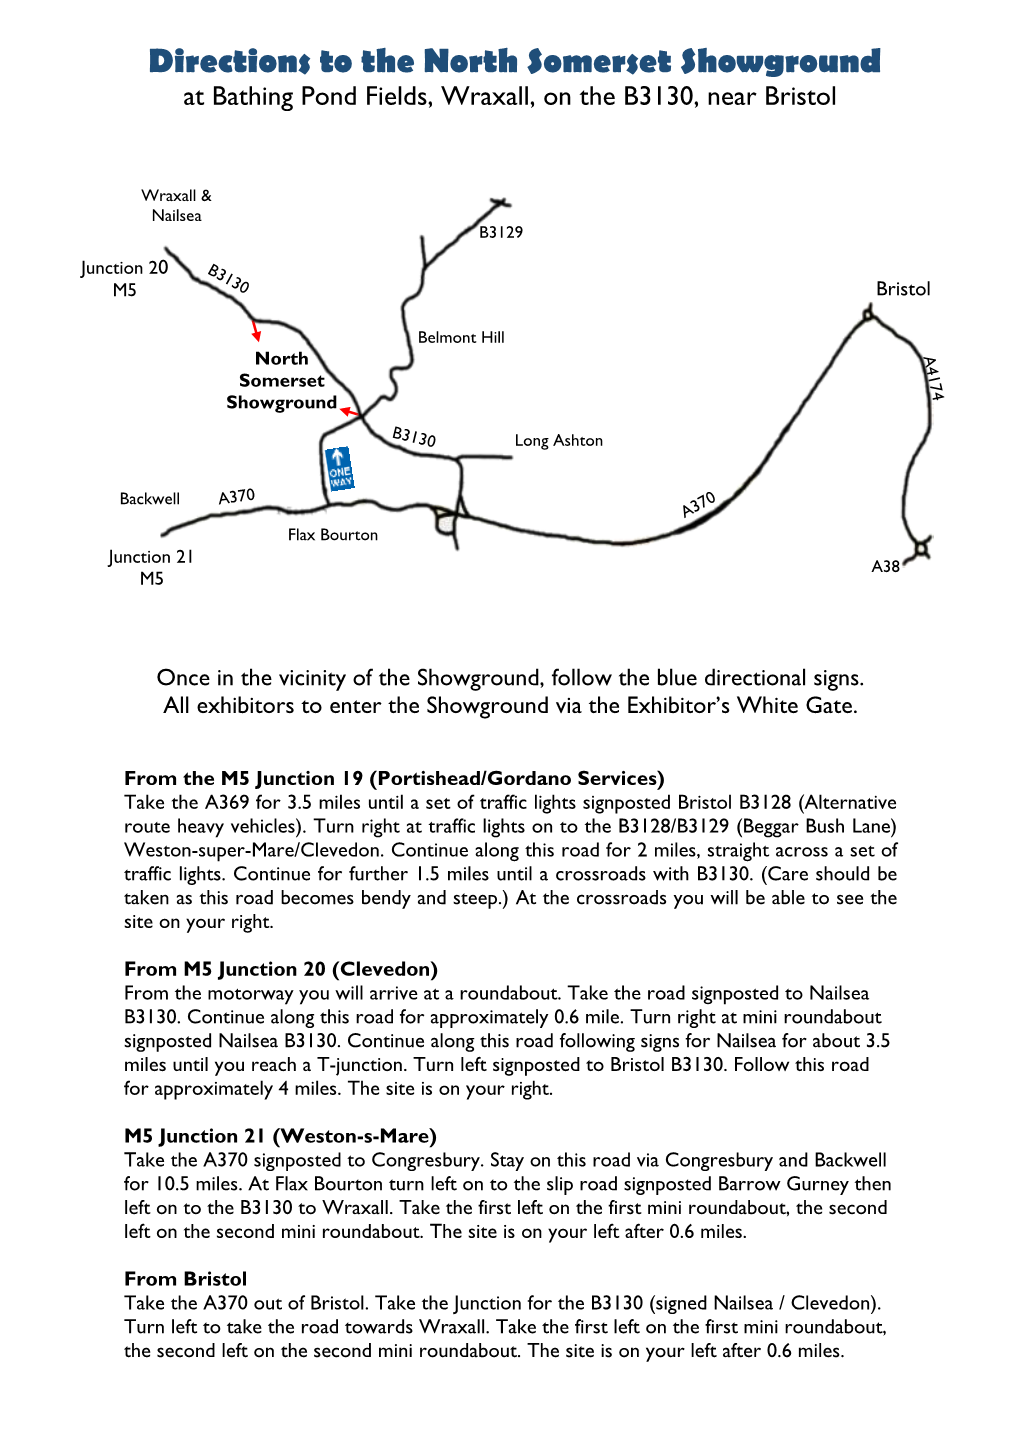 Directions to the North Somerset Showground at Bathing Pond Fields, Wraxall, on the B3130, Near Bristol